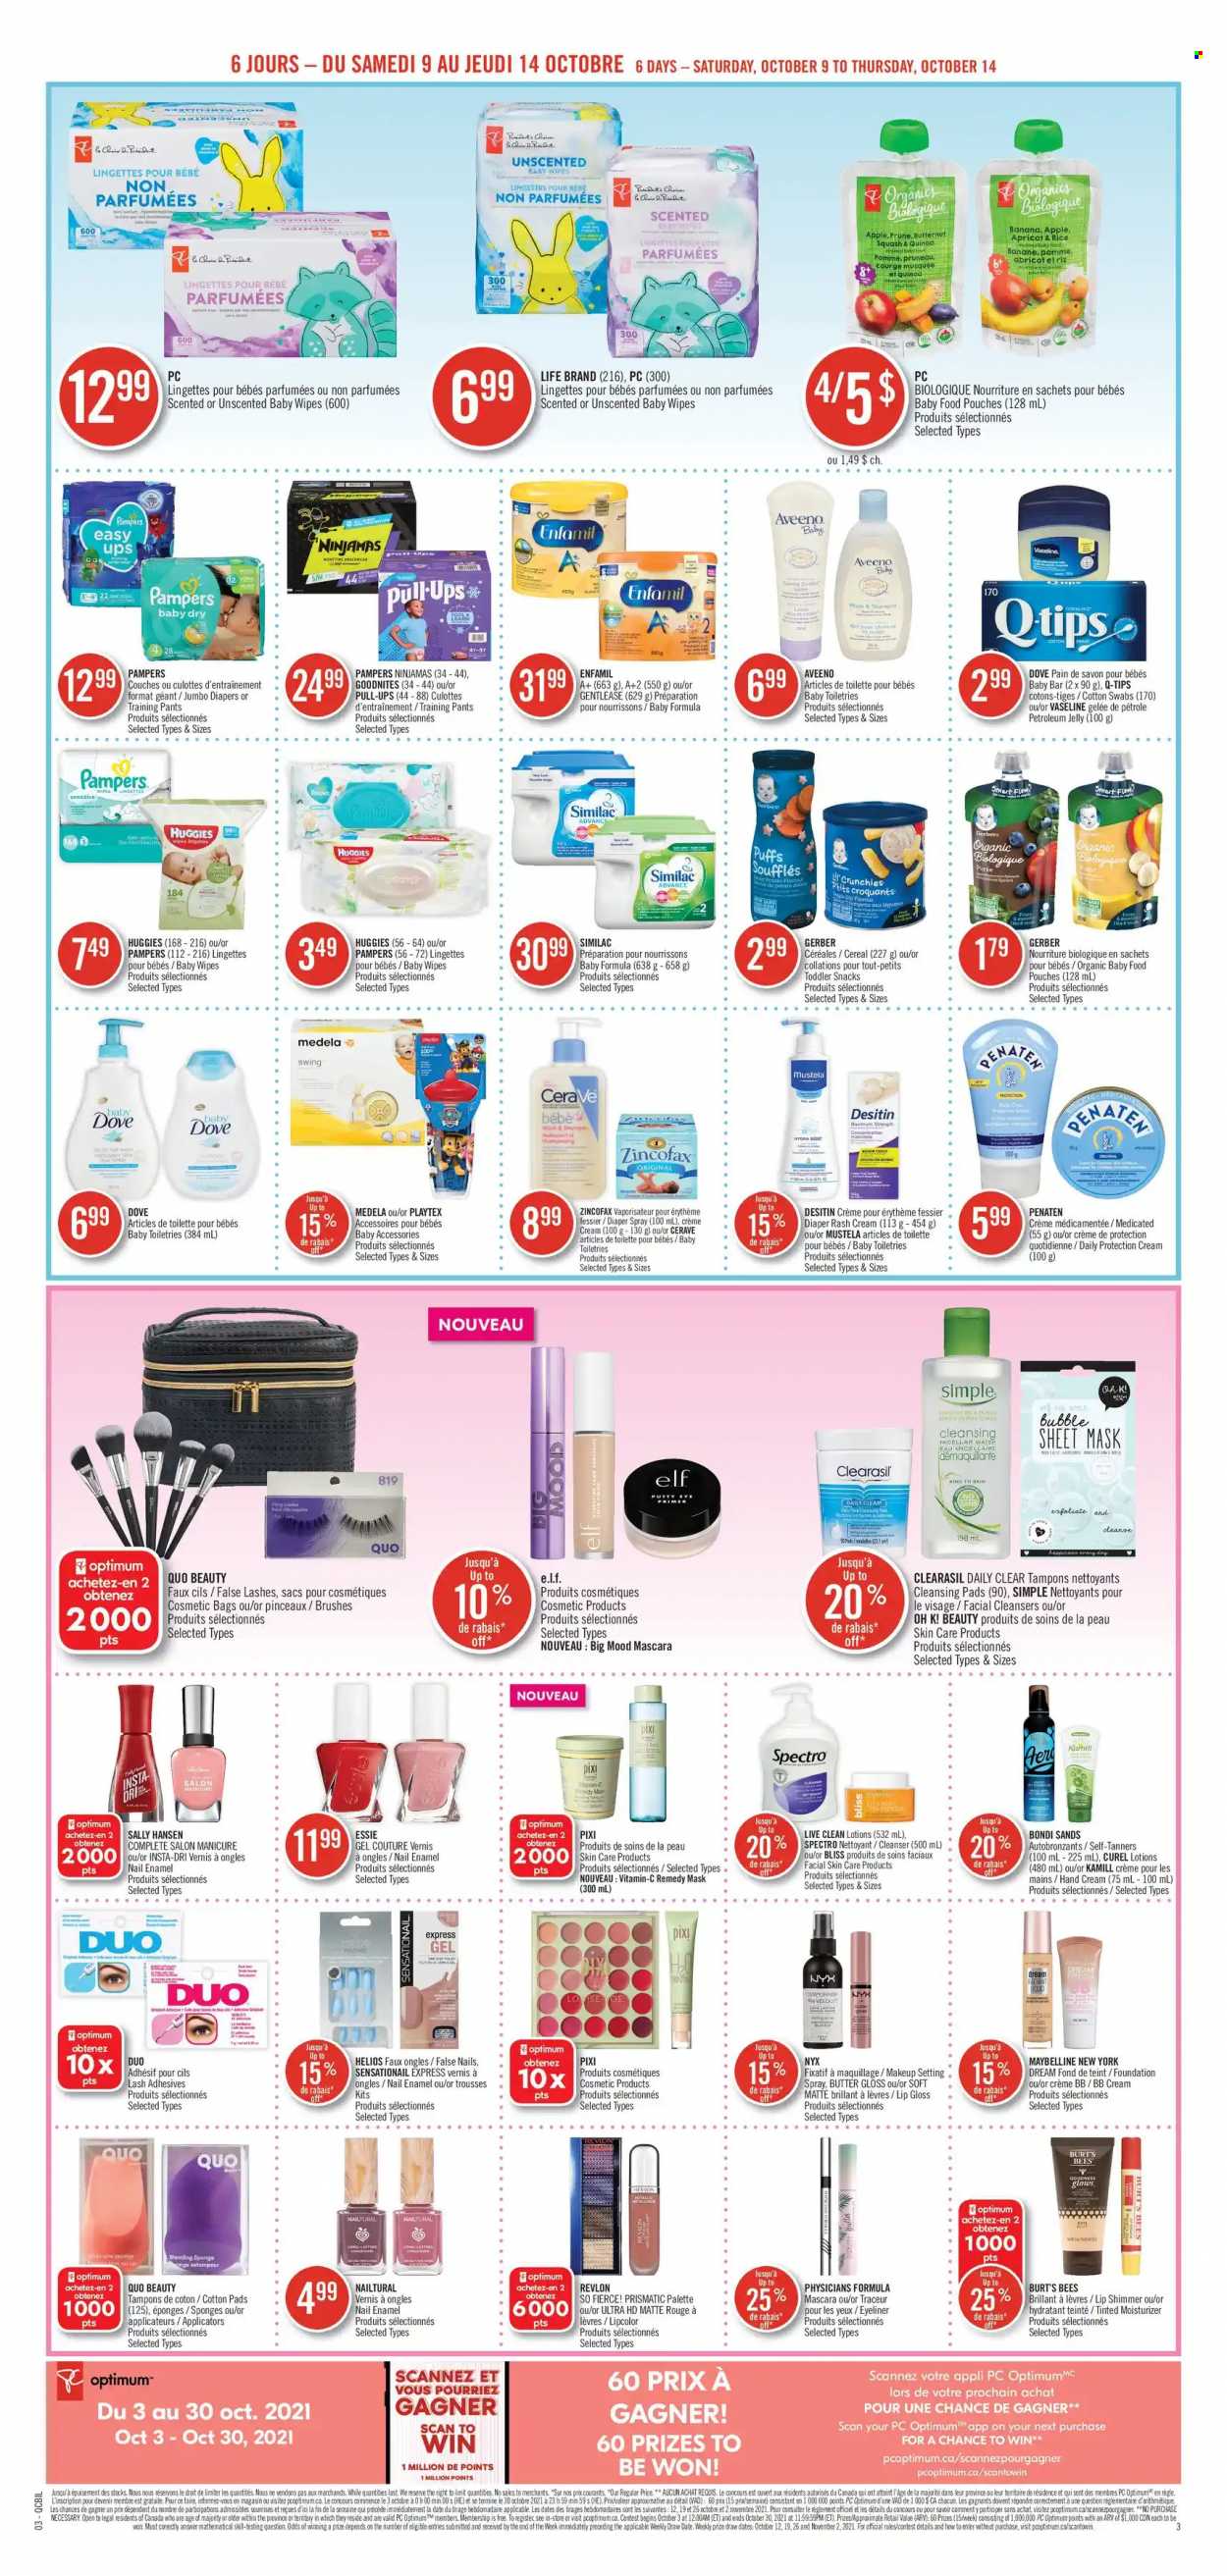 thumbnail - Pharmaprix Flyer - October 09, 2021 - October 14, 2021 - Sales products - puffs, butternut squash, snack, Gerber, cereals, rice, Enfamil, Similac, organic baby food, wipes, pants, baby wipes, nappies, baby pants, Aveeno, petroleum jelly, Vaseline, Playtex, tampons, CeraVe, cleanser, moisturizer, Curél, NYX Cosmetics, Bondi Sands, Revlon, Palette, hand cream, cosmetic bag, manicure, nail enamel, lip gloss, makeup, mascara, eyeliner, setting spray, sponge, UHD TV, ultra hd, Elf, Desitin, Dove, Maybelline, quinoa, Sally Hansen, Huggies, Pampers. Page 3.